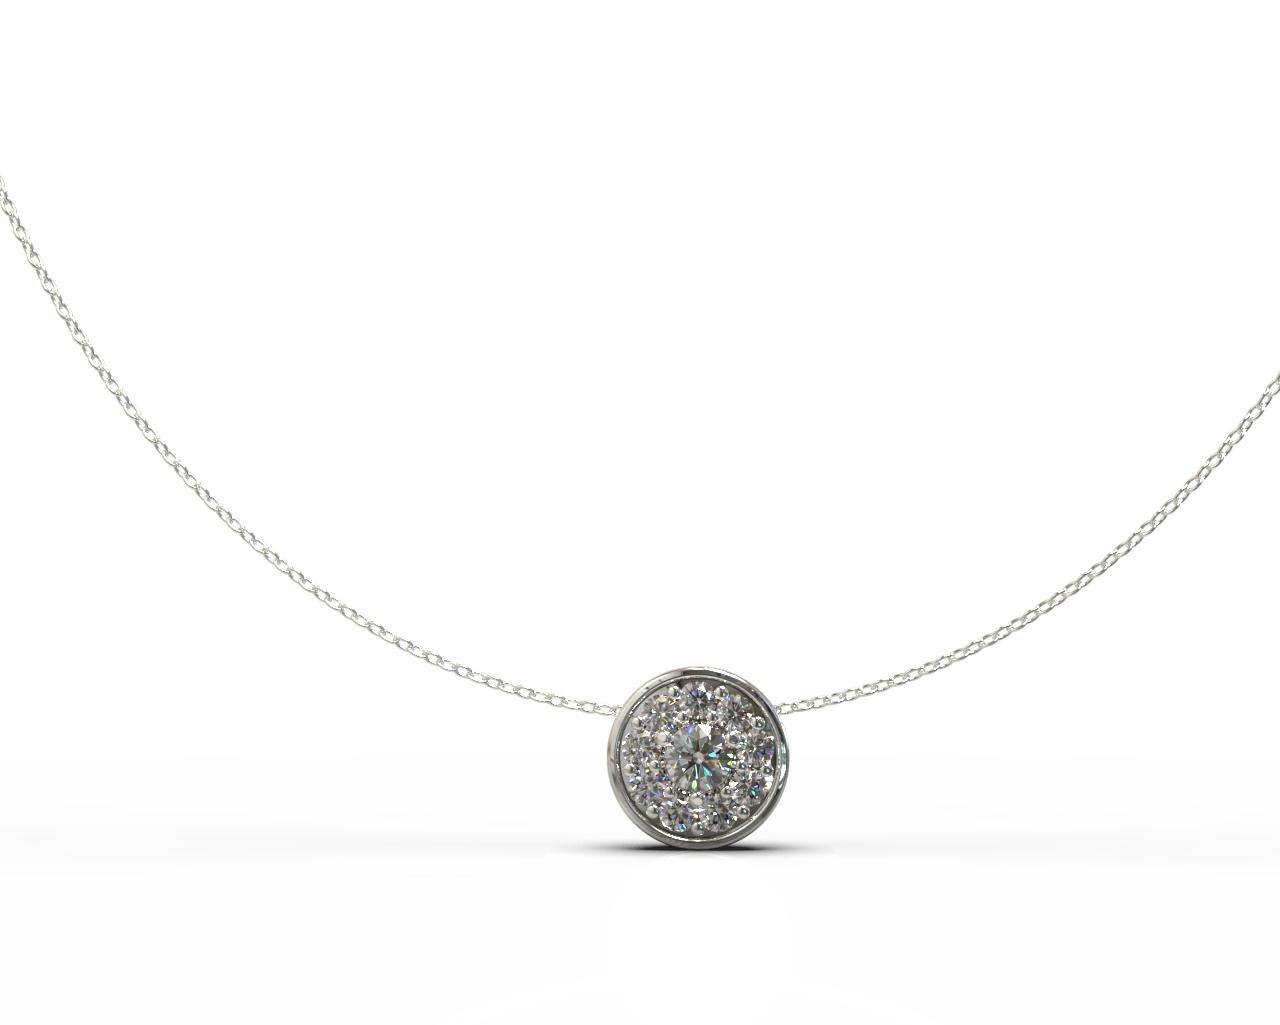 Halo Necklace

This gorgeous petite pendant features a stunning round brilliant cut diamond surrounded by a halo of white diamonds. The circular setting is suspended from an elegant platinum trace chain.

Round brilliant cut diamond: F-Colour , VS2